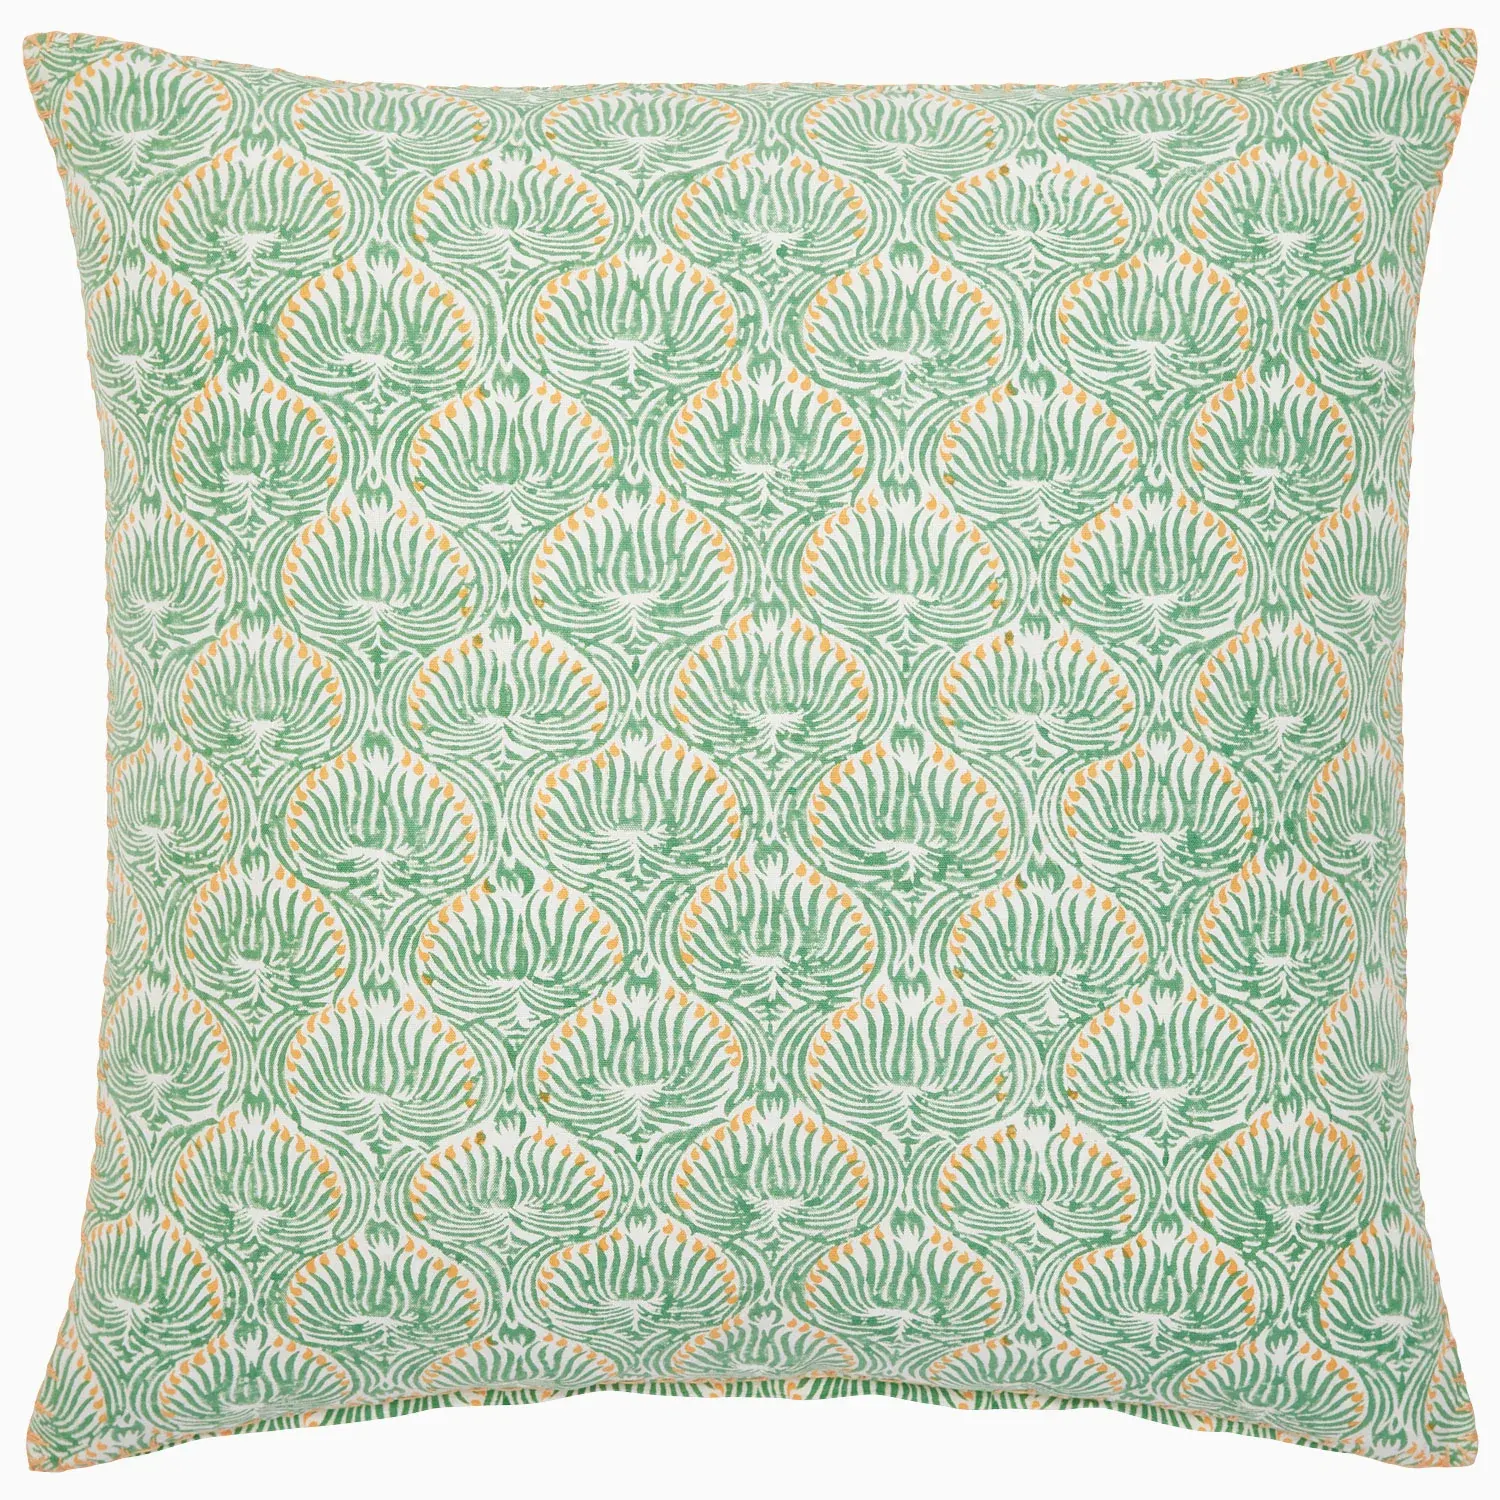 The Best Throw Pillow Shops For Every Budget, According To